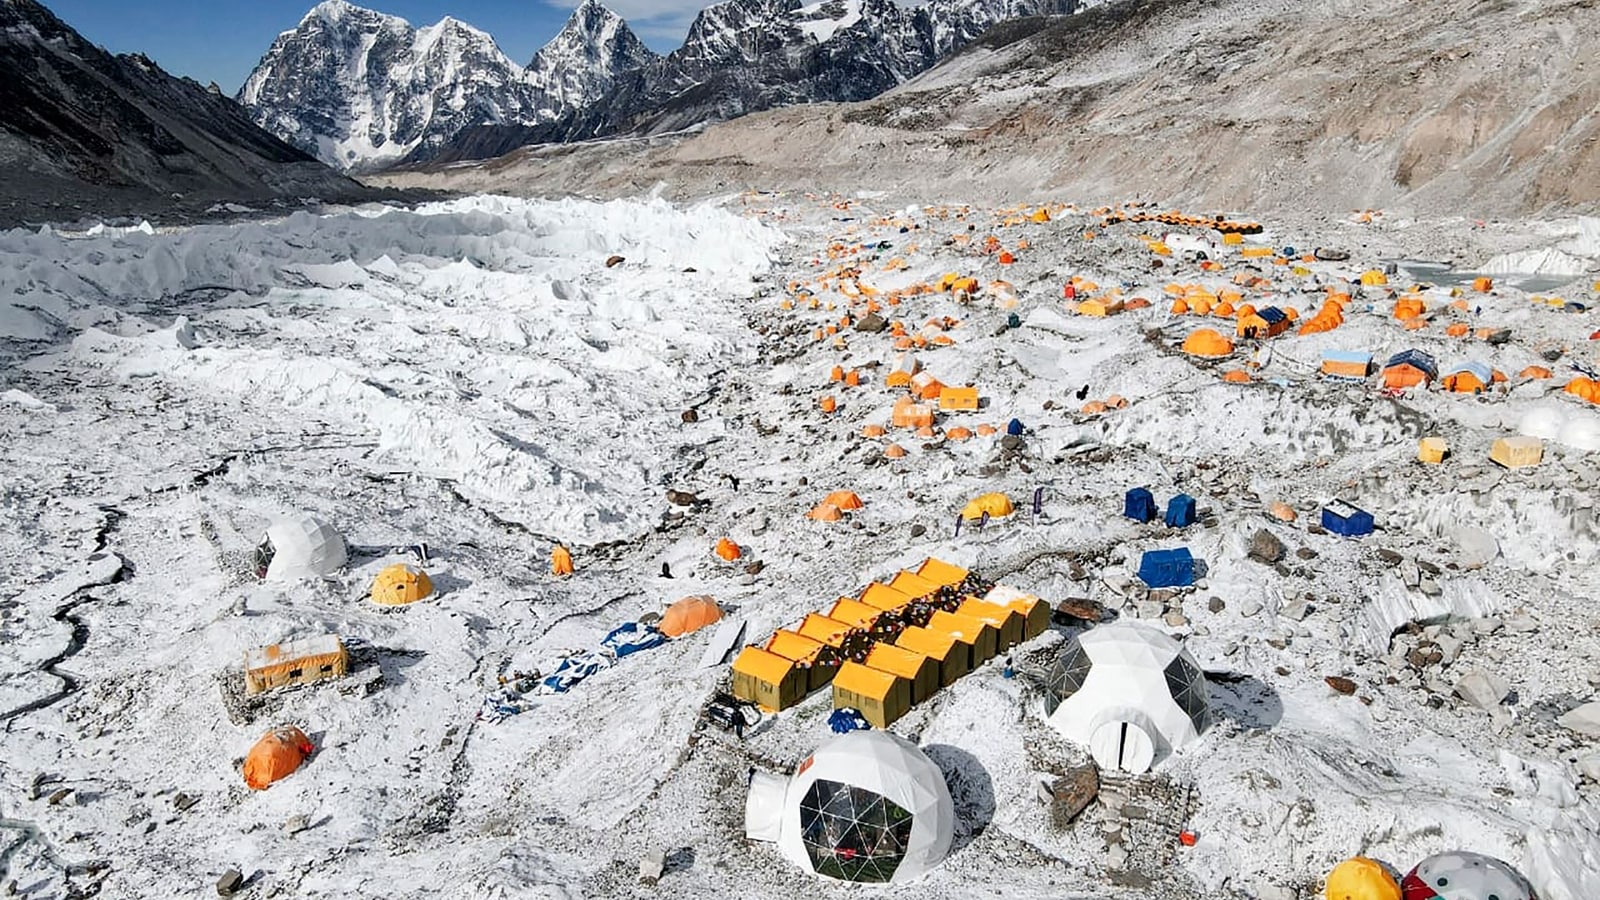 Nepal's tourism department mulls shifting Everest base camp due to risk of melting glacier, unsafe human activity